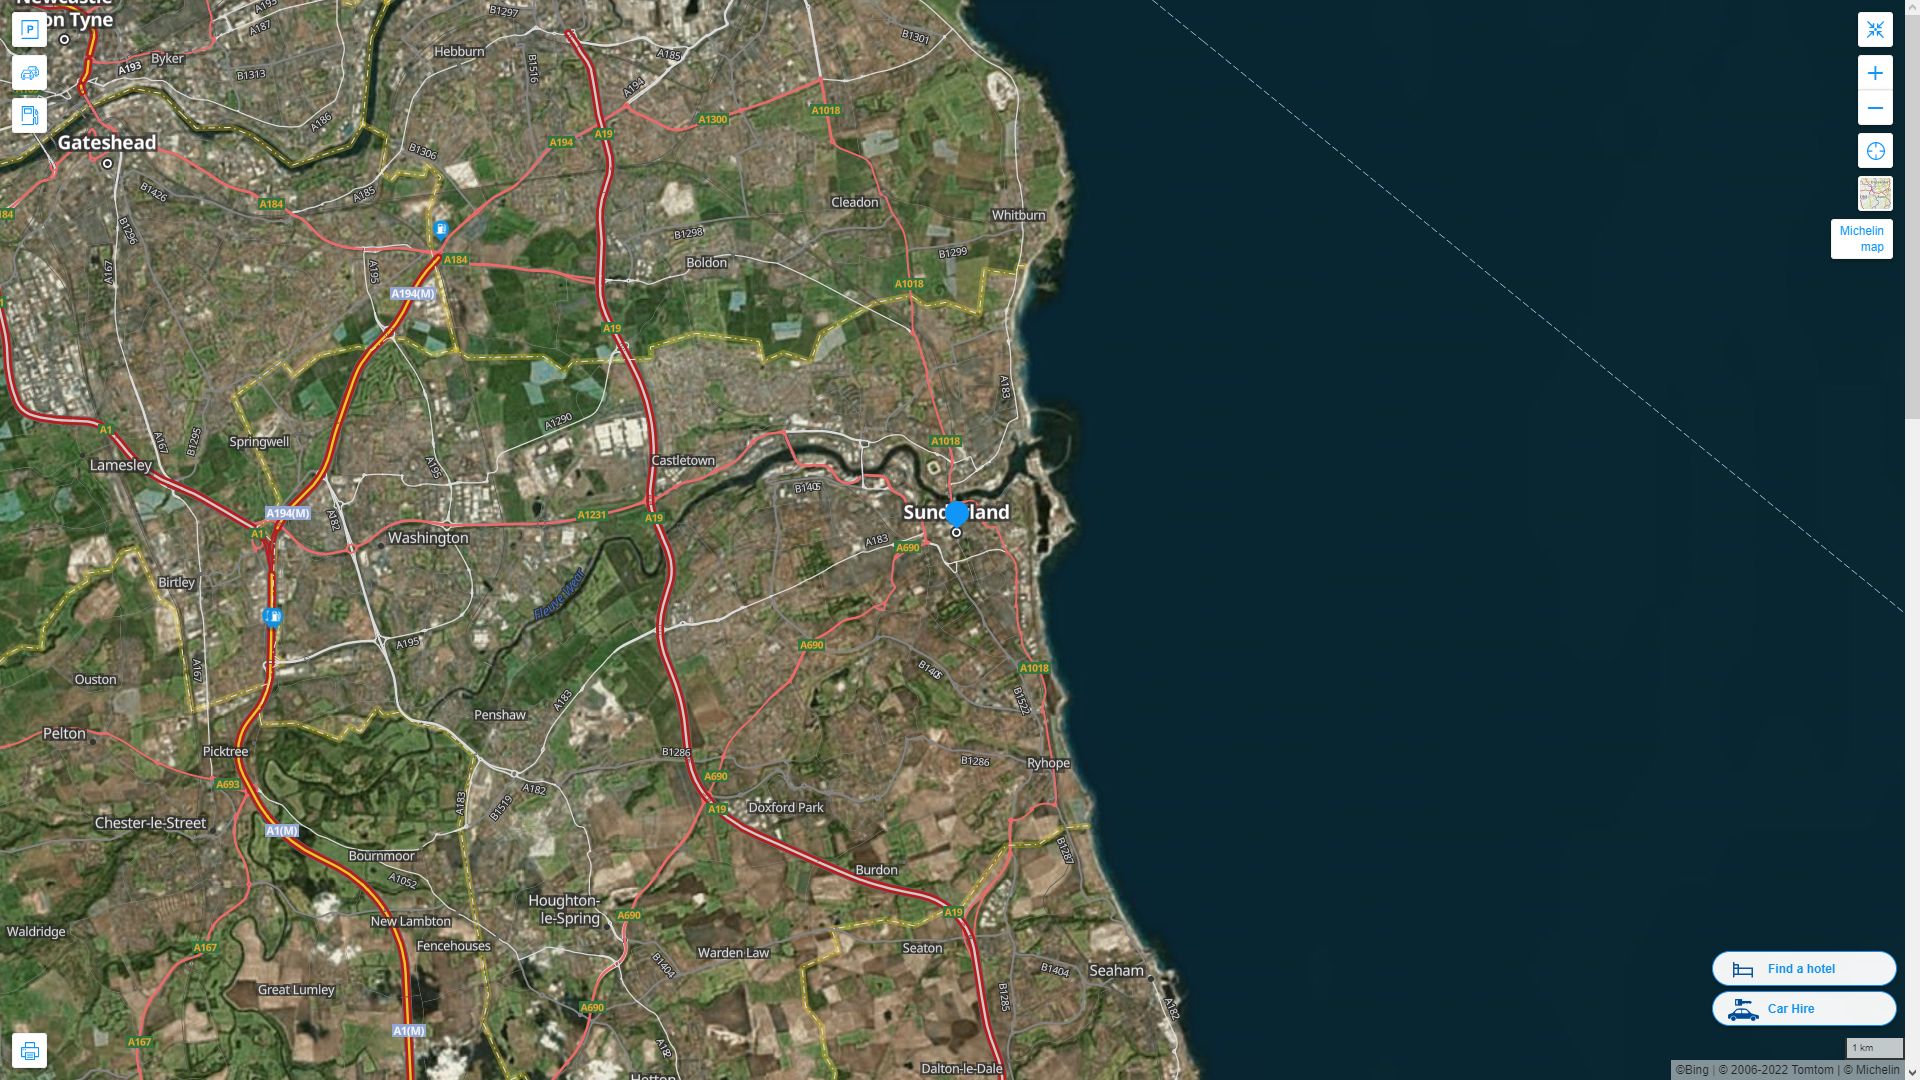 Sunderland Highway and Road Map with Satellite View